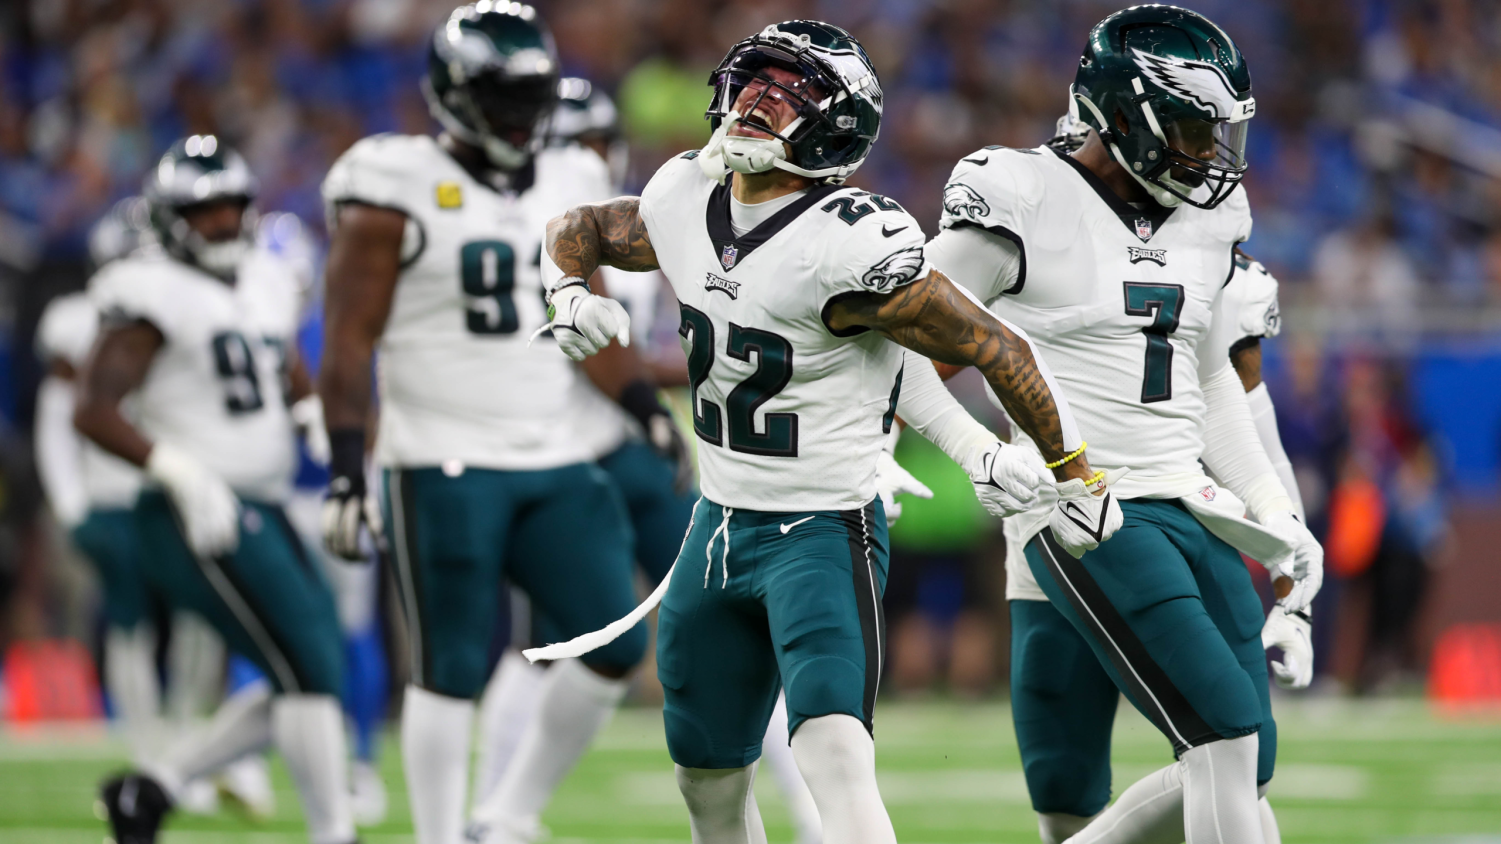 Eagles survive a nailbiter in Motor City